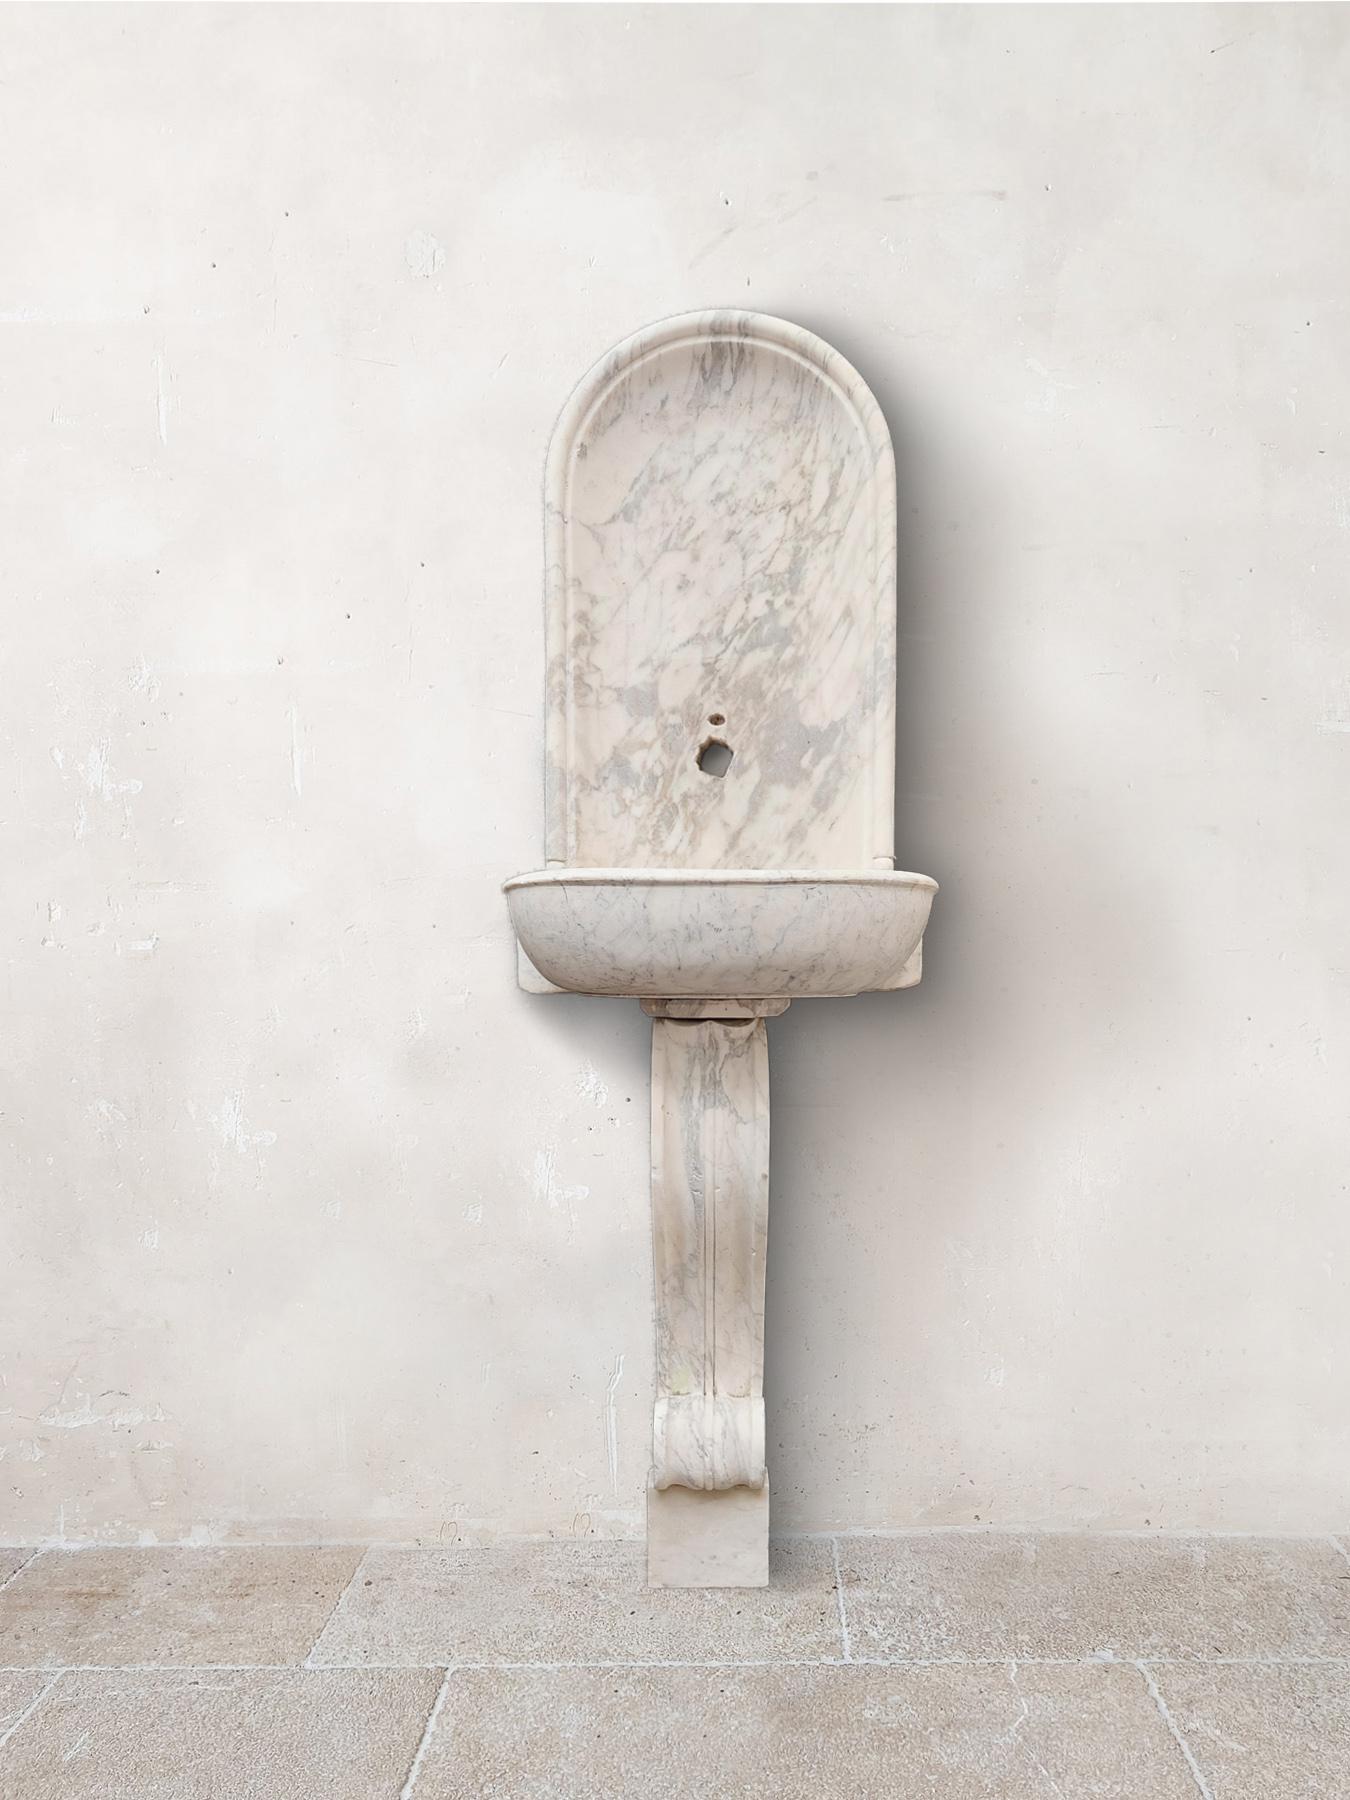 18th century Dutch wall fountain from the hall of a canal house. Made of Carrara marble. Antique wall fountain, with a niche-shaped high back including tap hole, on a curled leg with palmette motif.
(sold without the sample tap that can be seen in